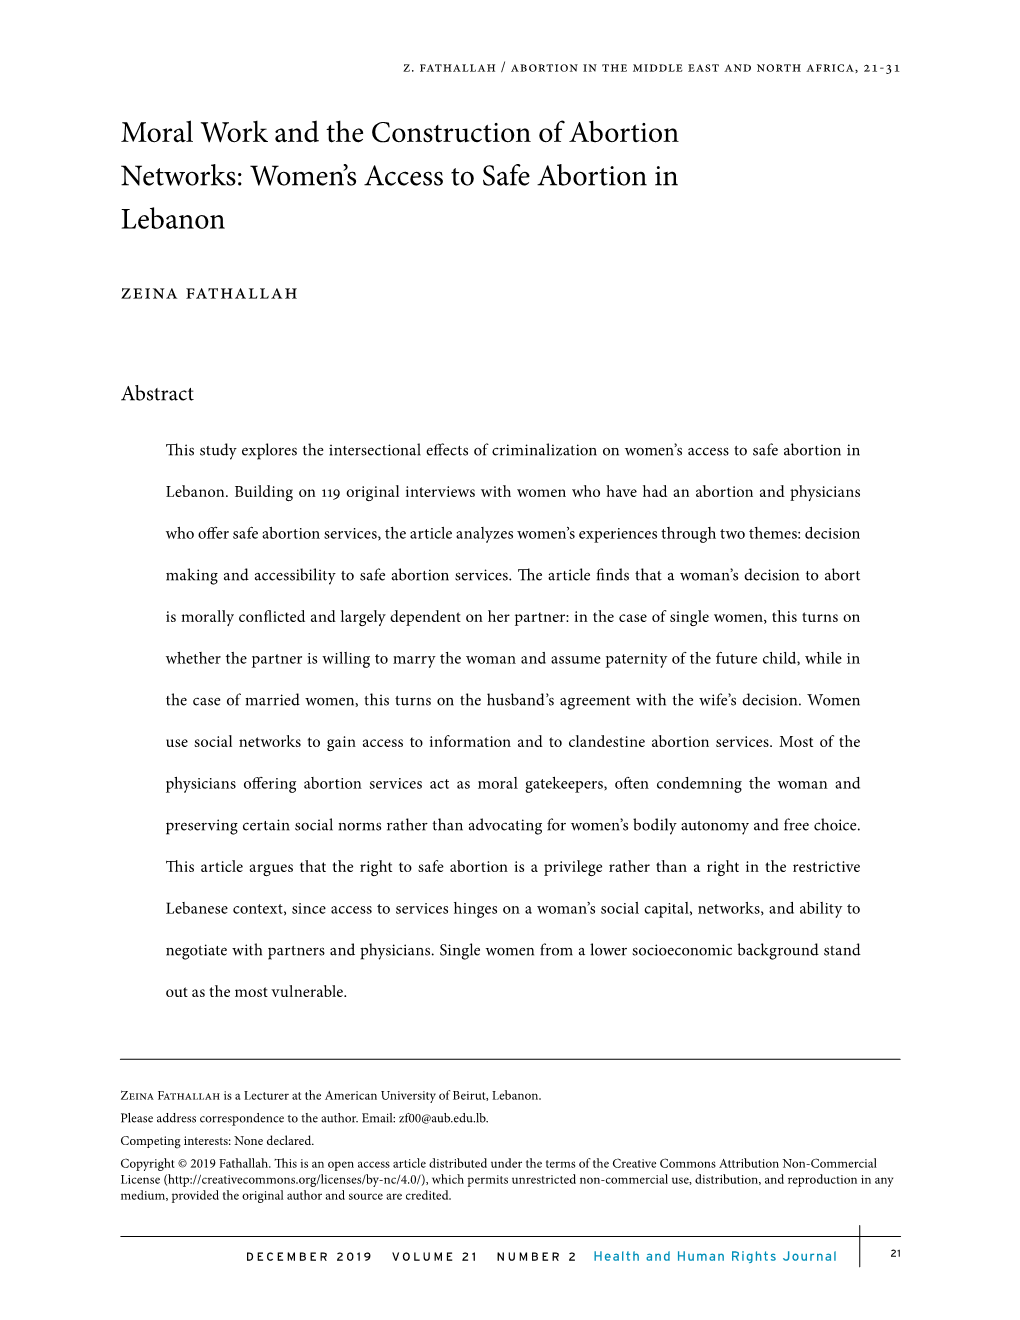 Women's Access to Safe Abortion in Lebanon